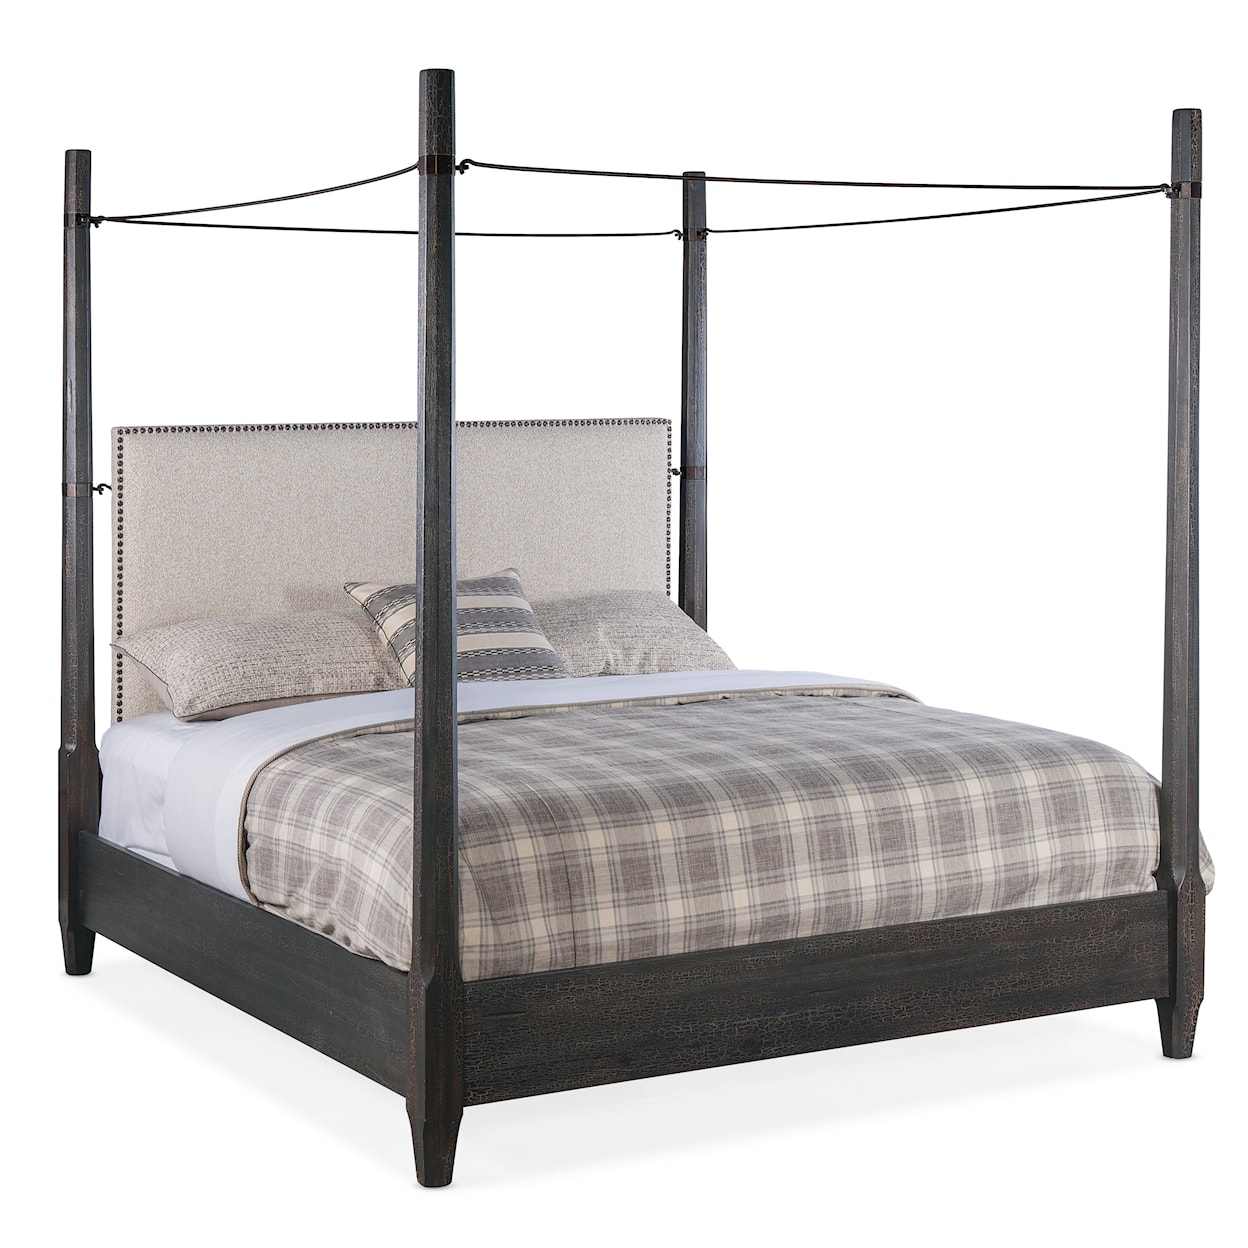 Hooker Furniture Big Sky King Poster Bed with Canopy